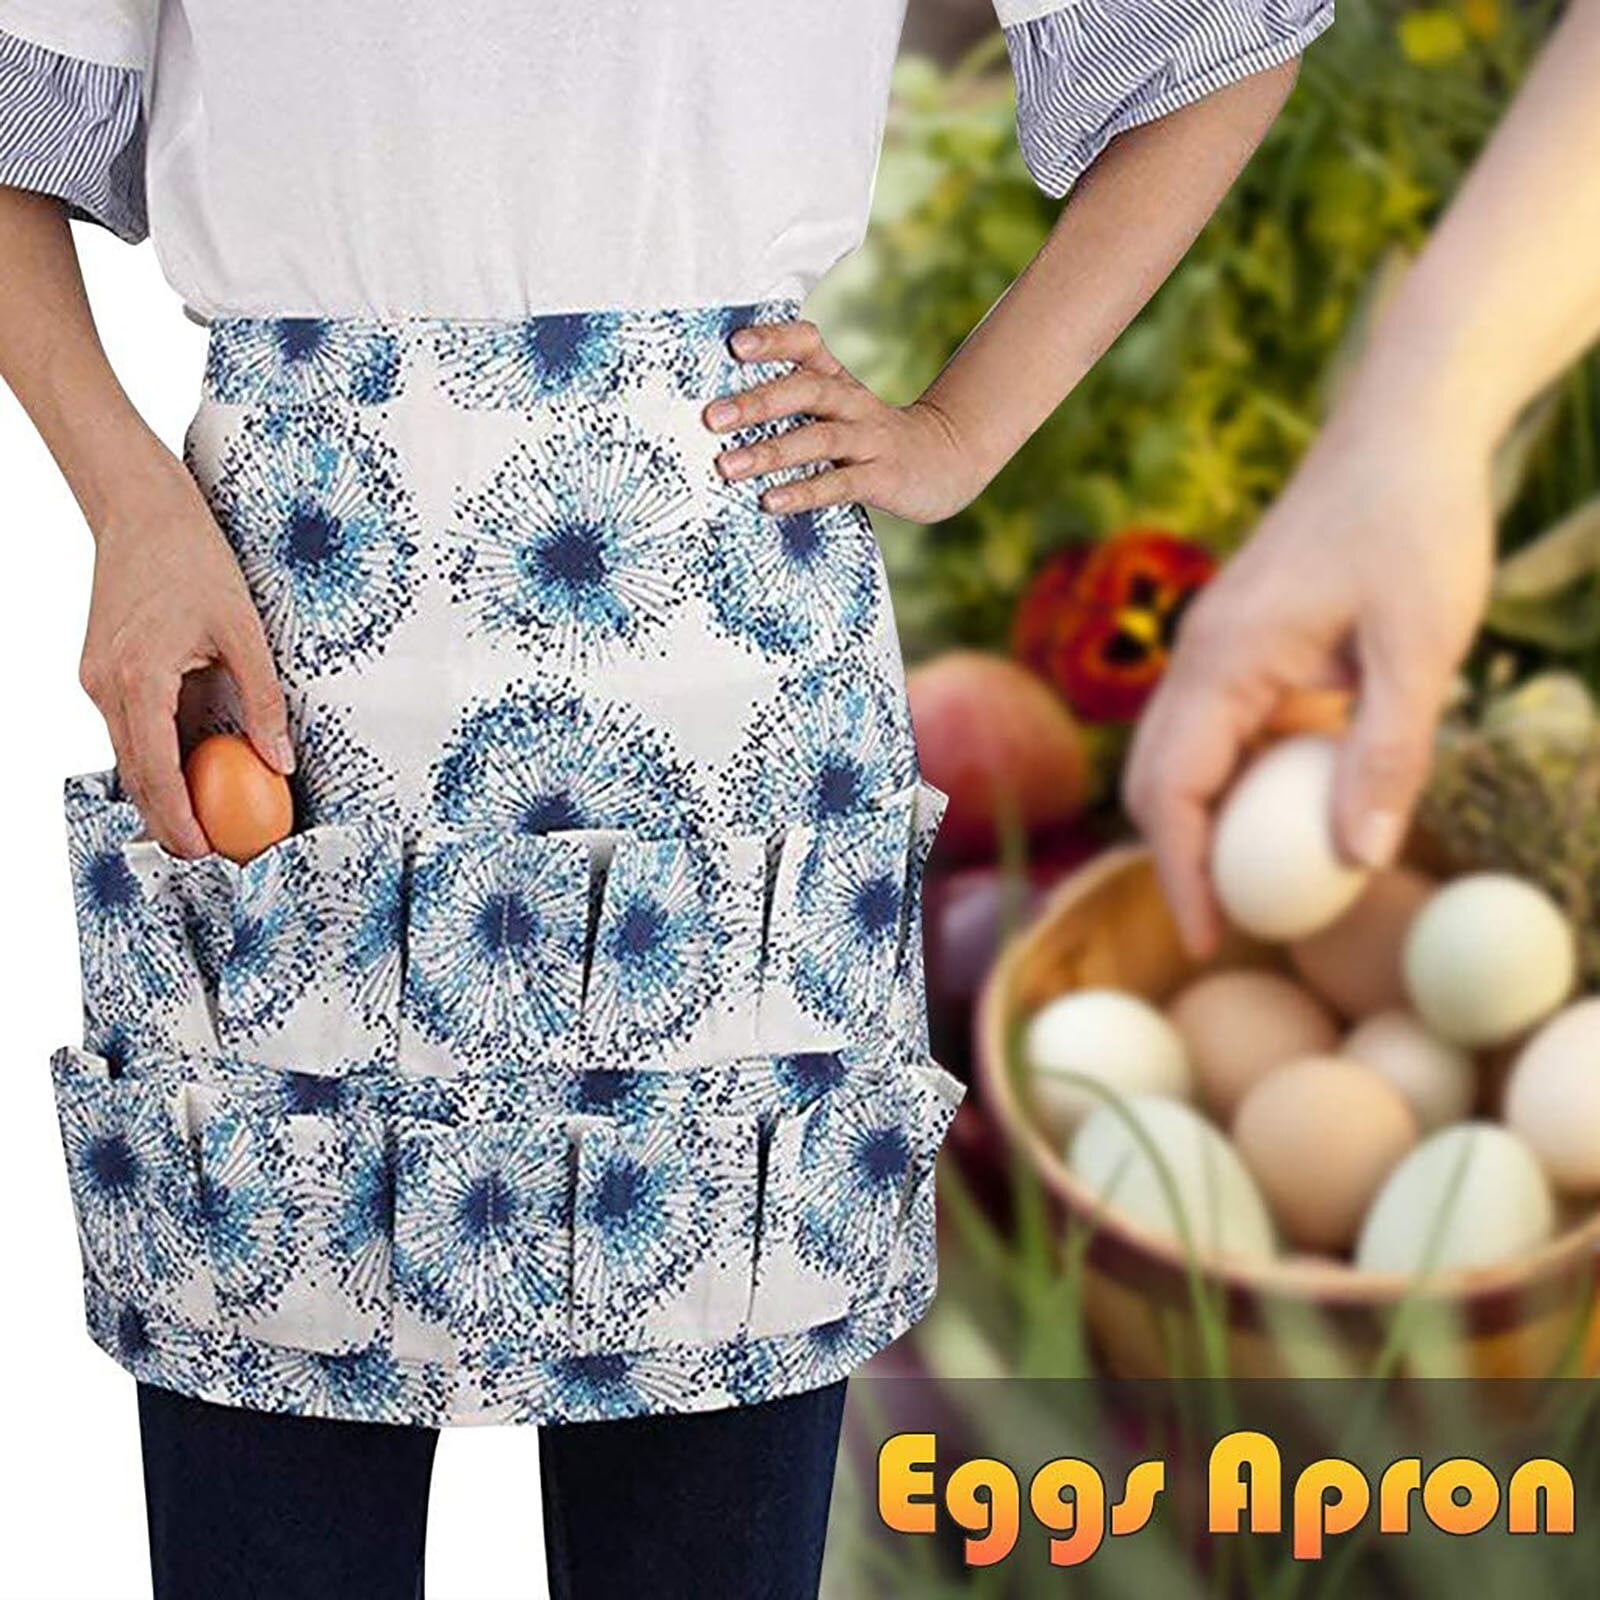 Backyard Barnyard Egg Gathering Apron 12 Pockets Soft Durable Denim Fabric  for Collecting Chicken and Quail Eggs